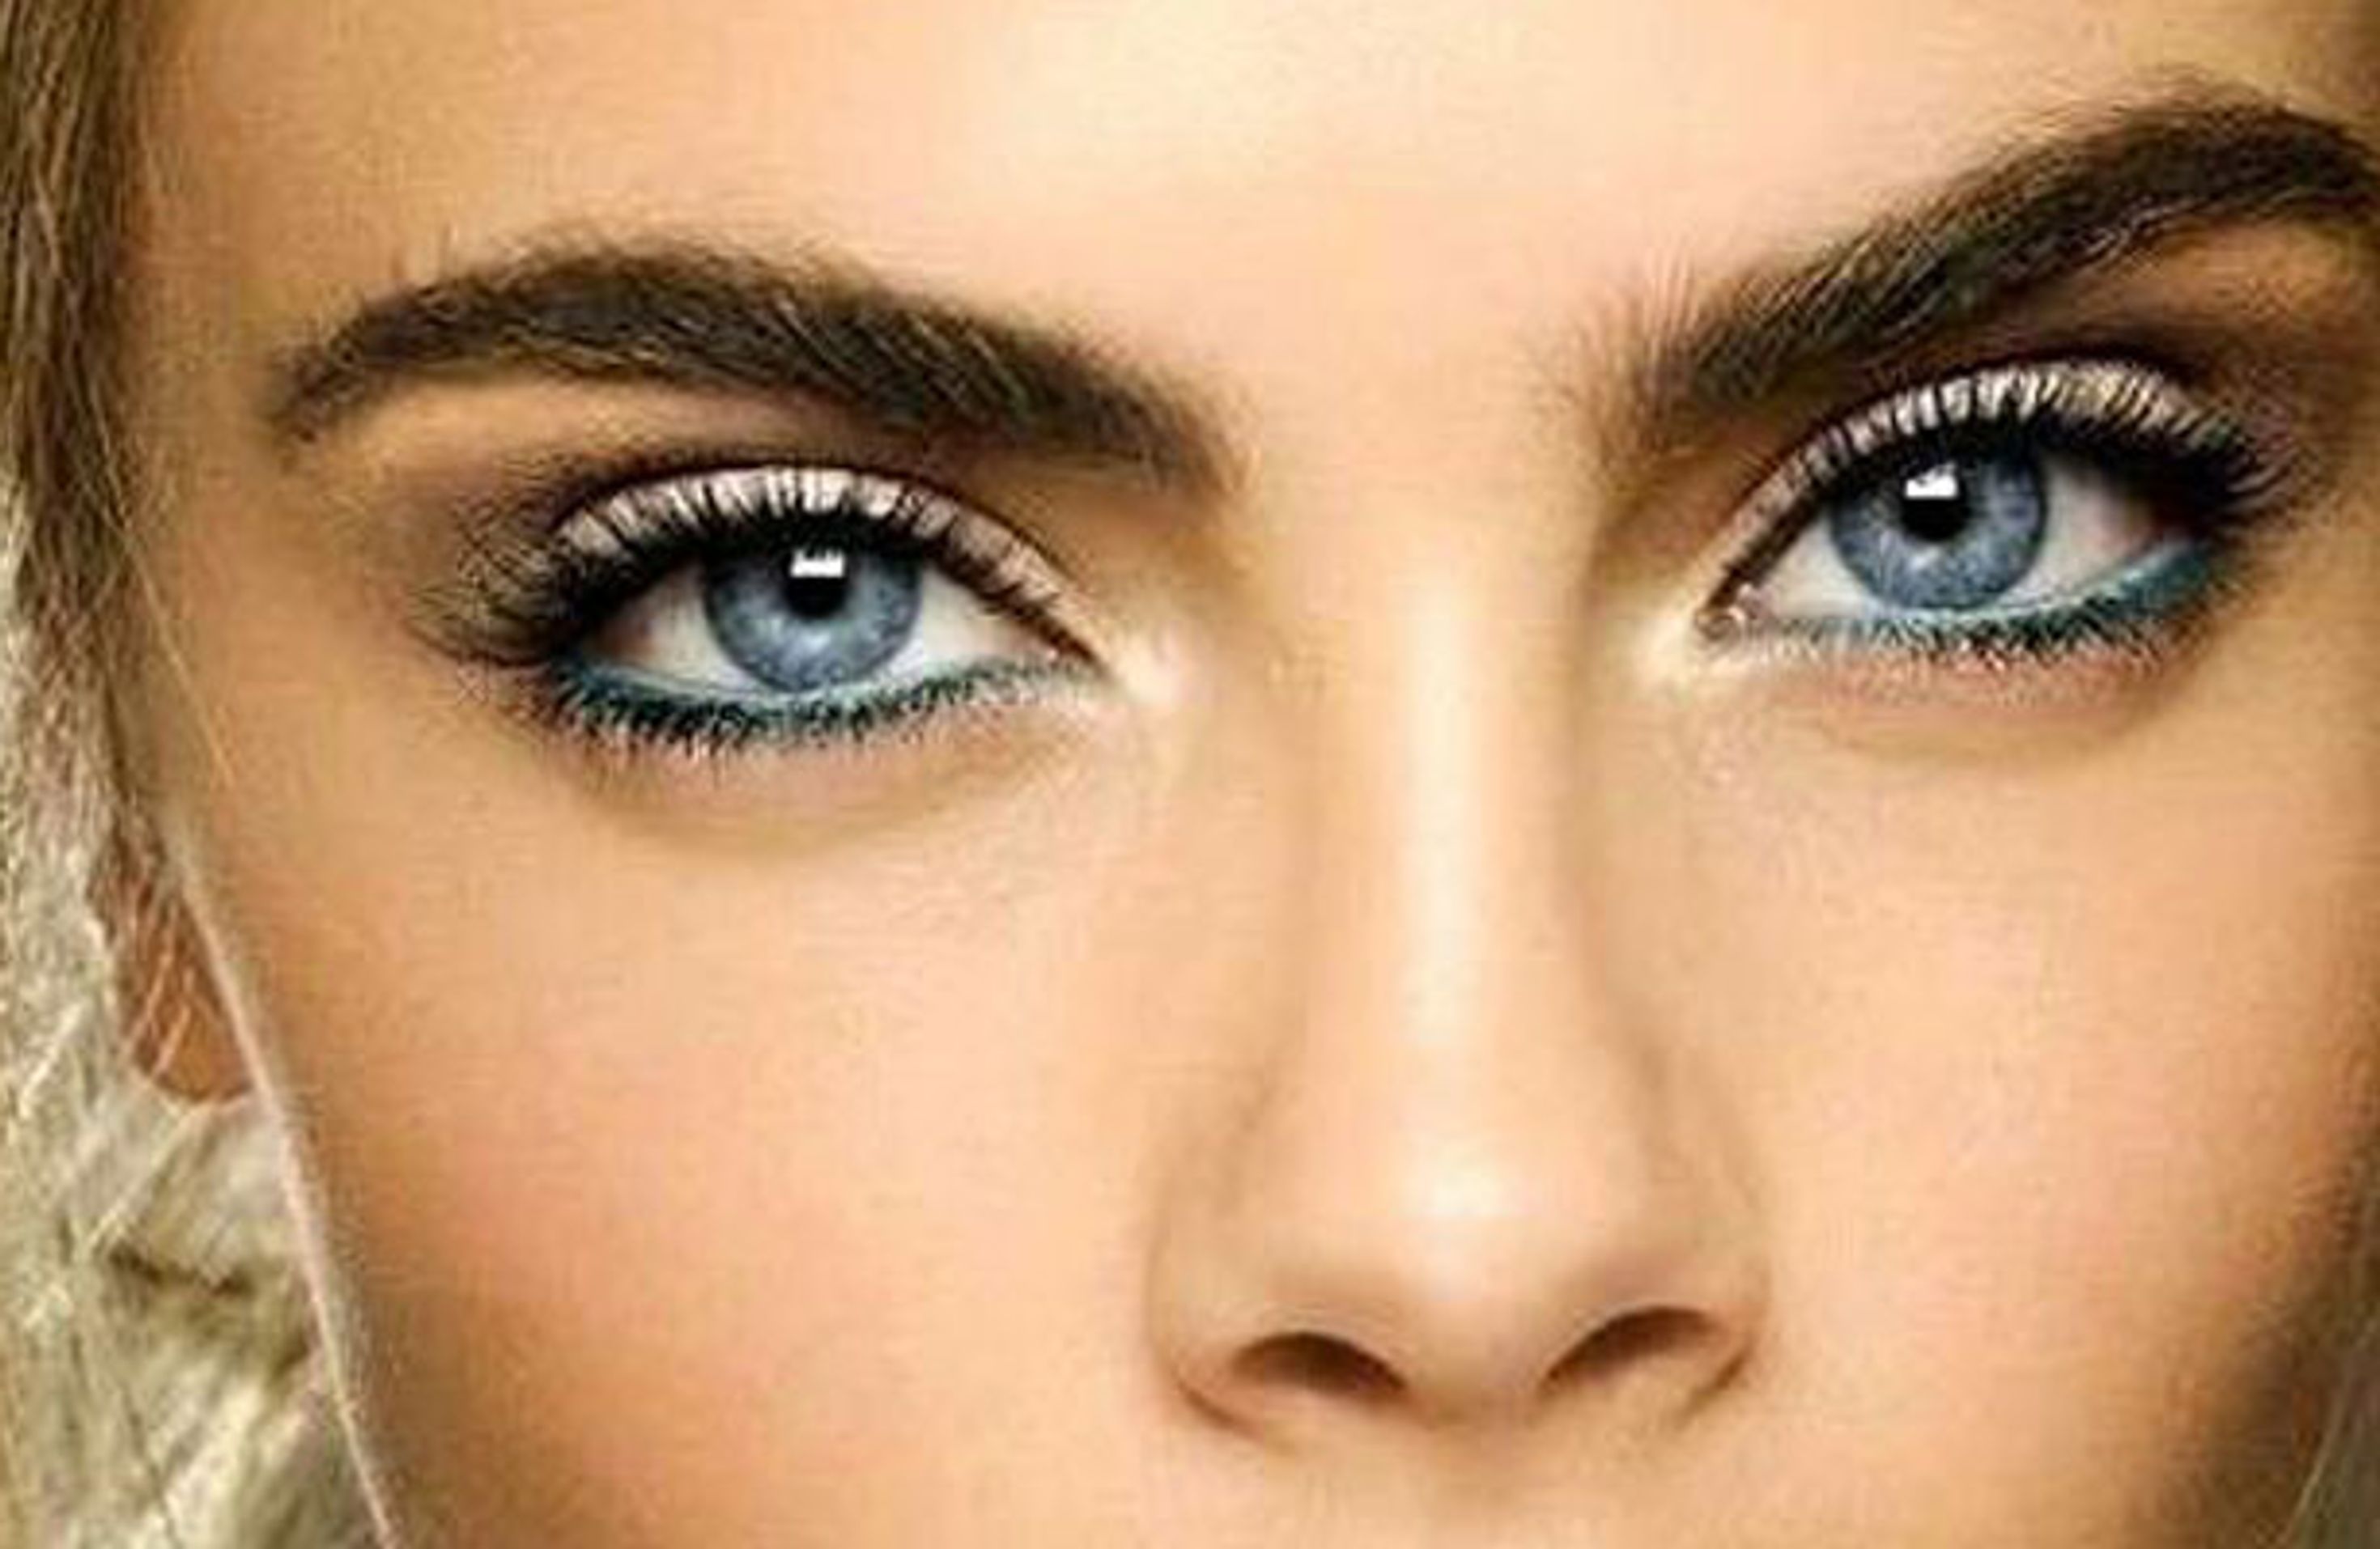 How To Make Your Eyes Pop: Step By Step